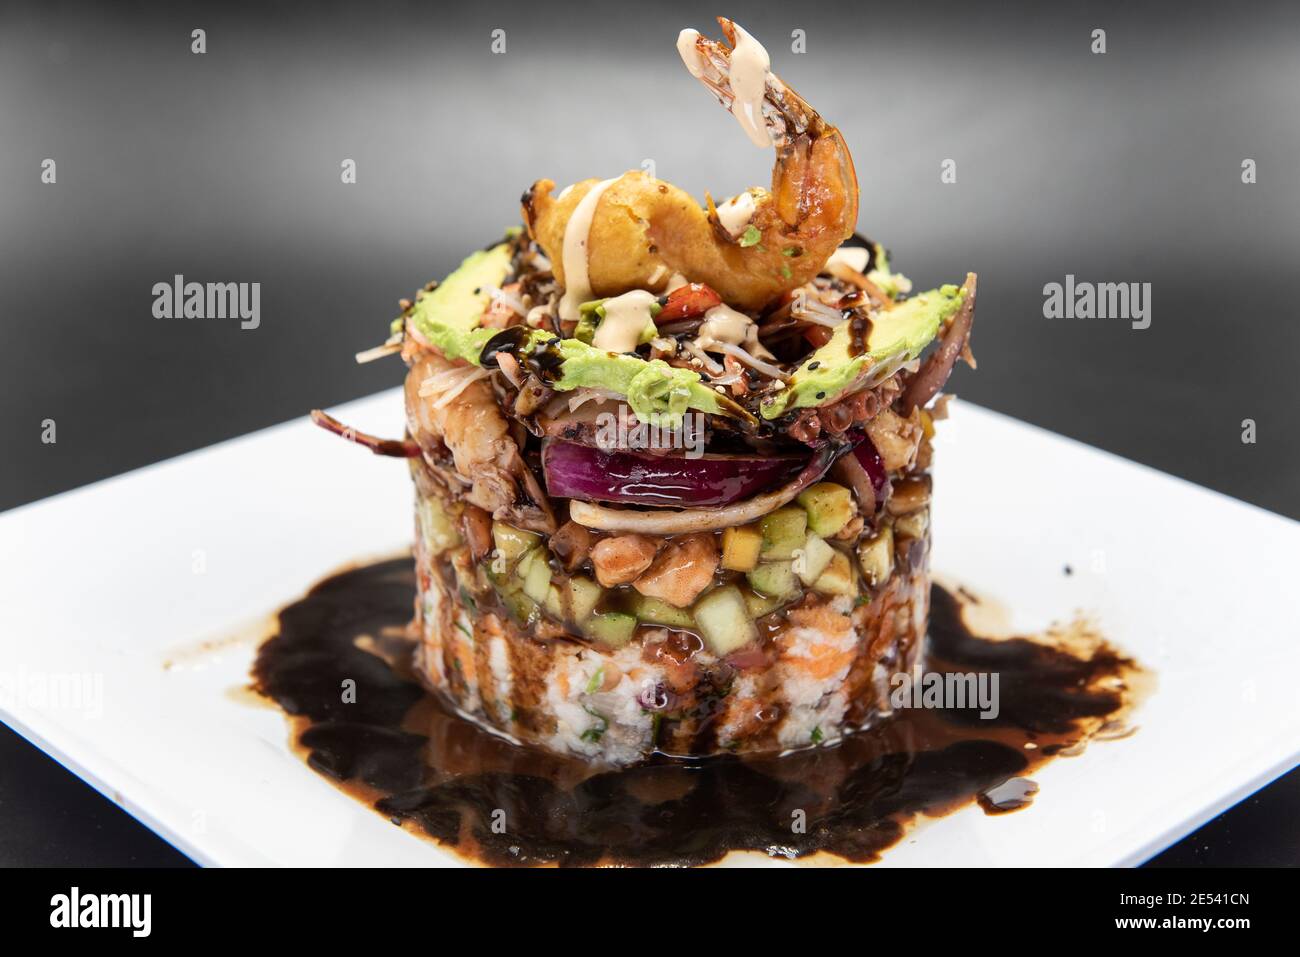 Cylidrical tower of various shellfish and seafood delicately constructed topped with fried shrimp. Stock Photo